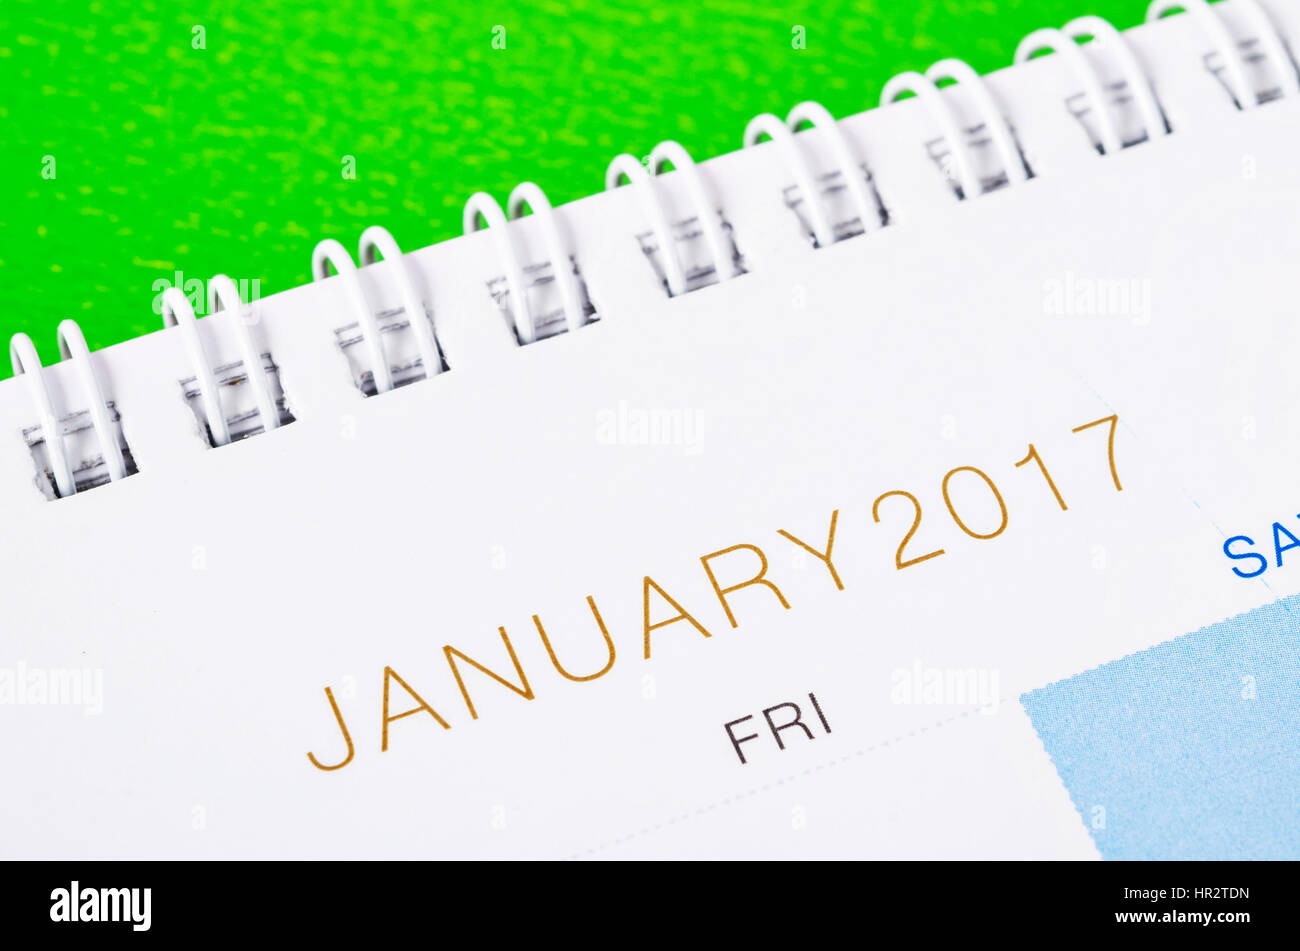 Desk top calendar January 2017 close up on green background. Stock Photo